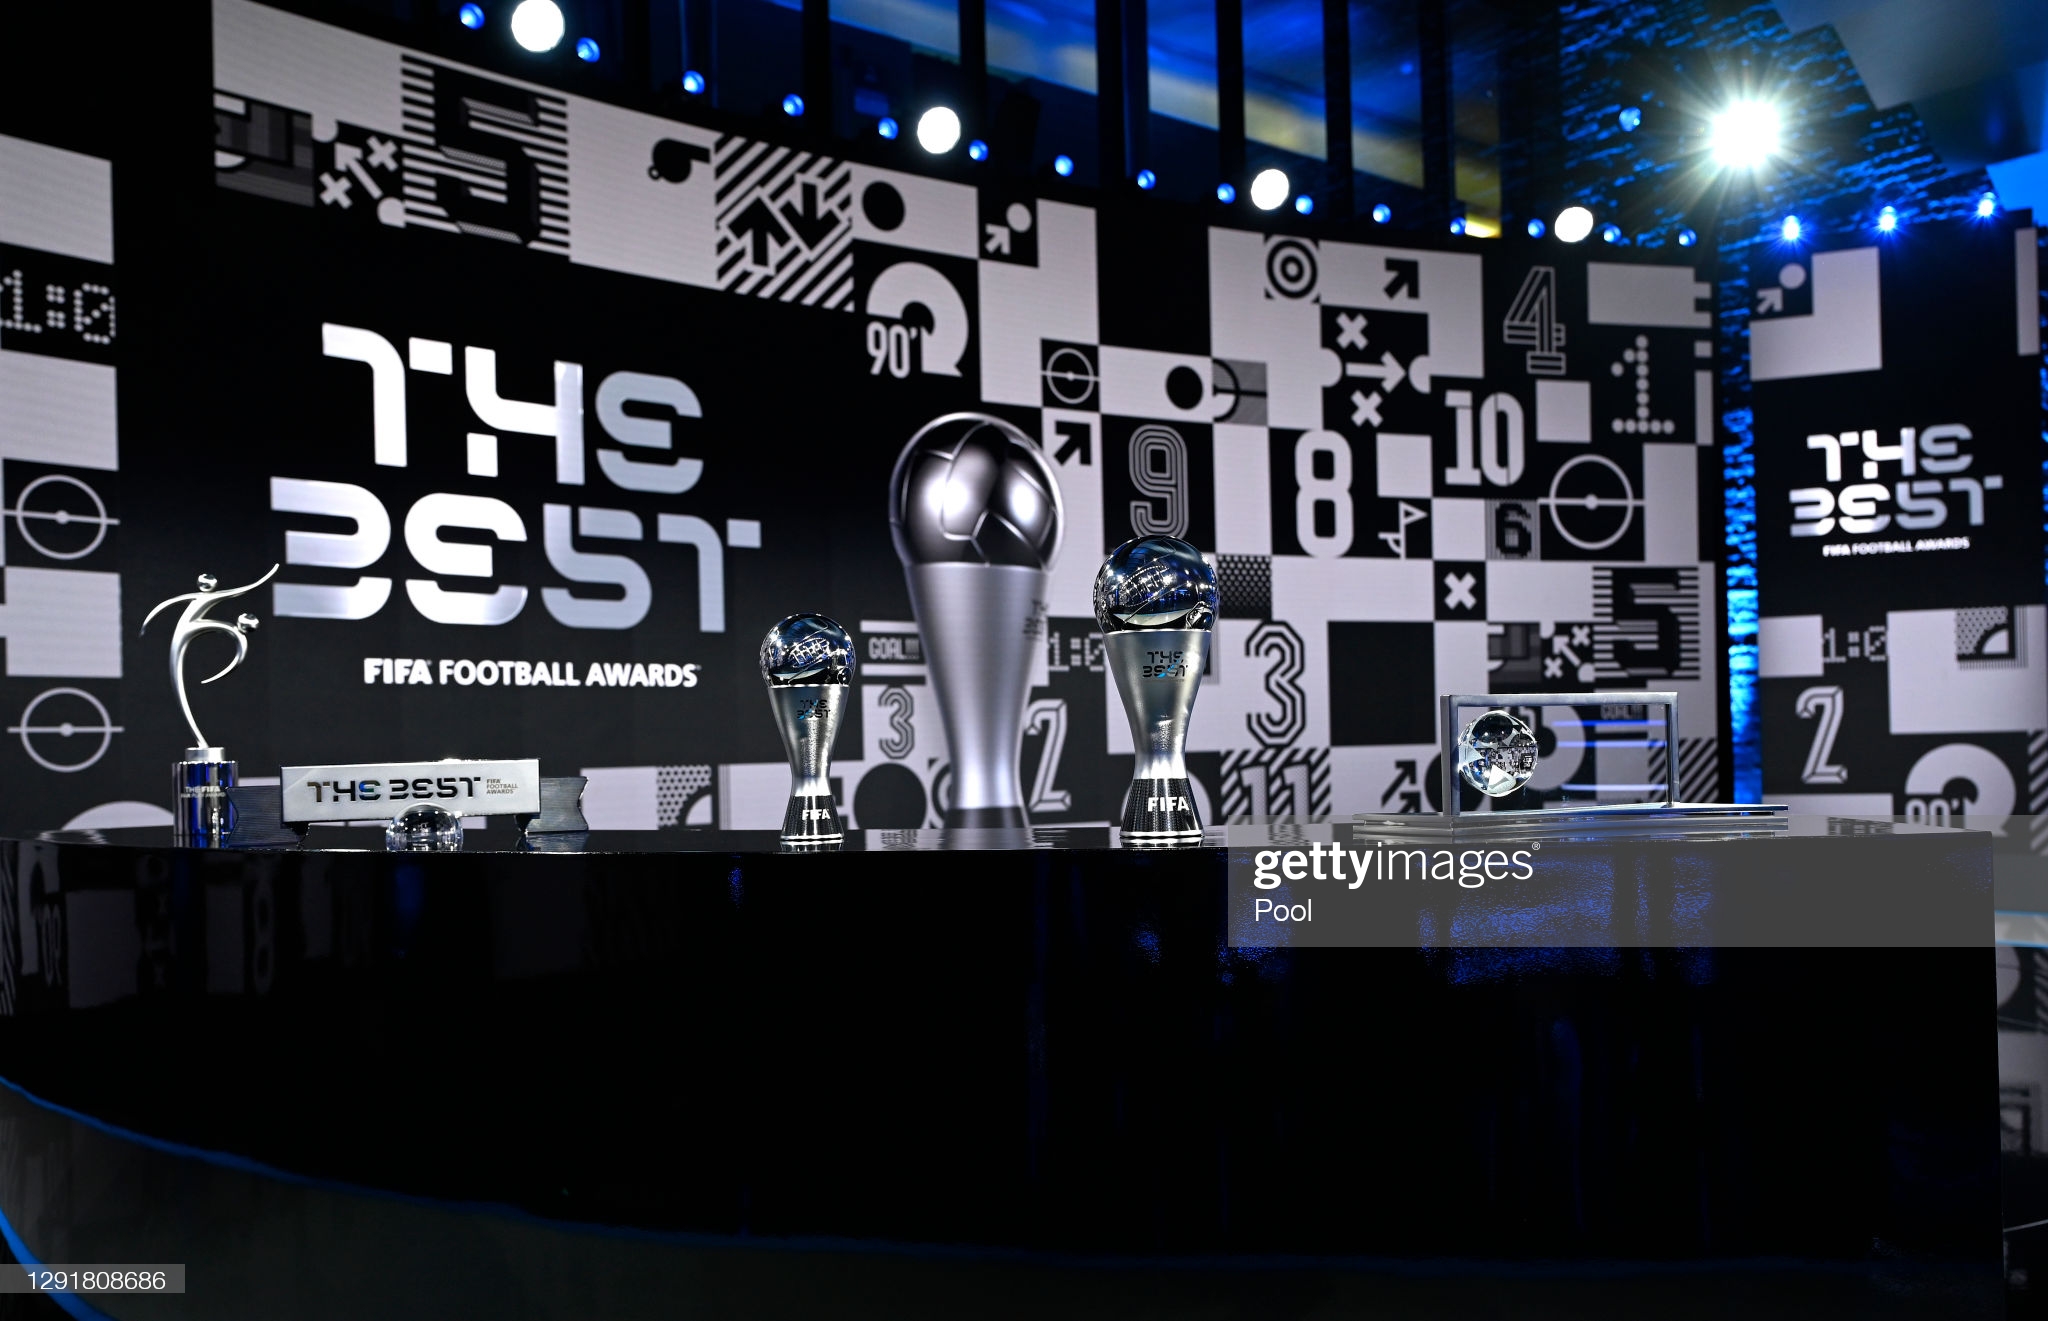 gettyimages-1291808686-2048x2048.jpg